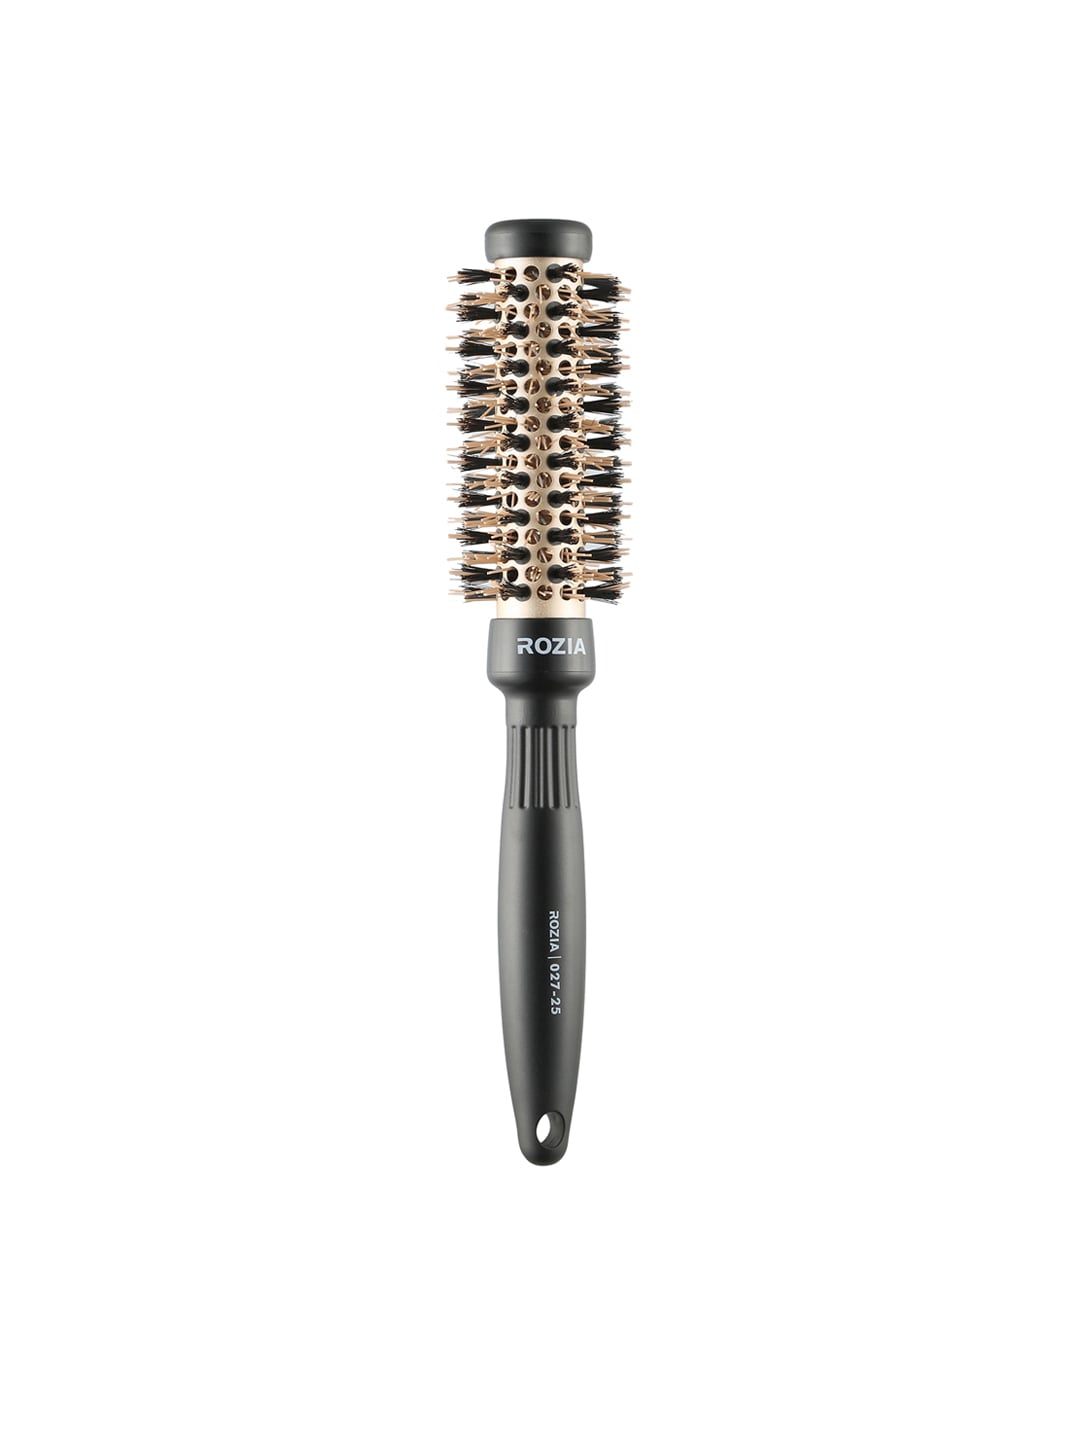 Rozia Unisex Grey & Gold-Toned Pro Boar Bristles Ionic Tech & Anti-Static Round Hair Brush 25mm Price in India